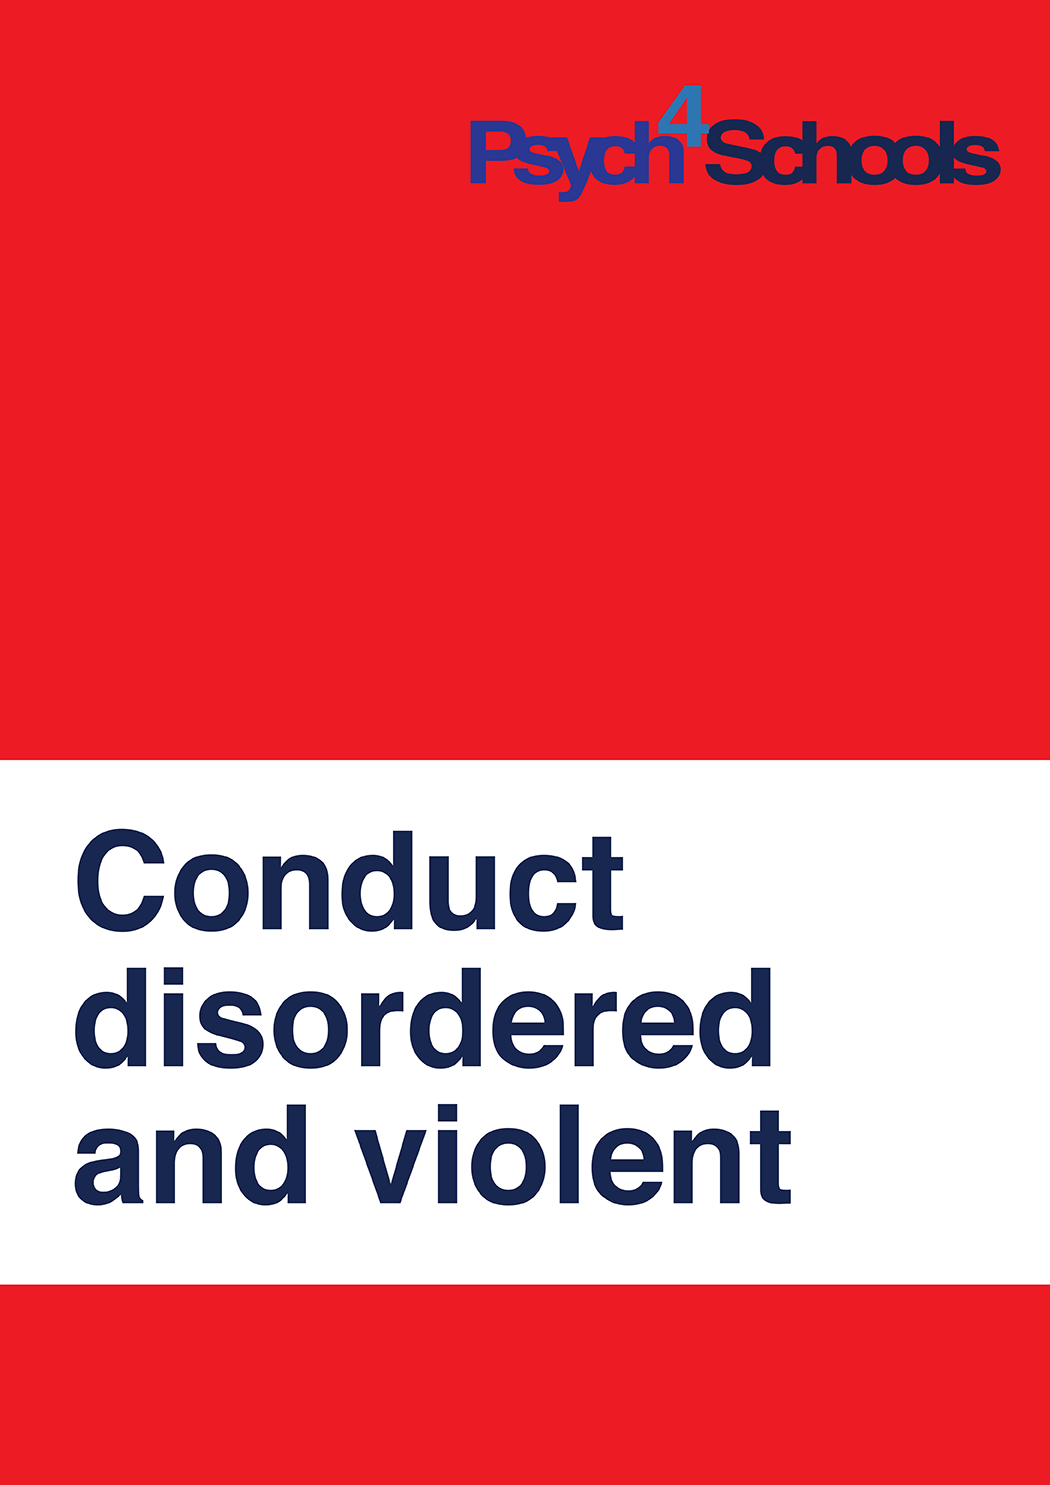 Conduct disordered and violent